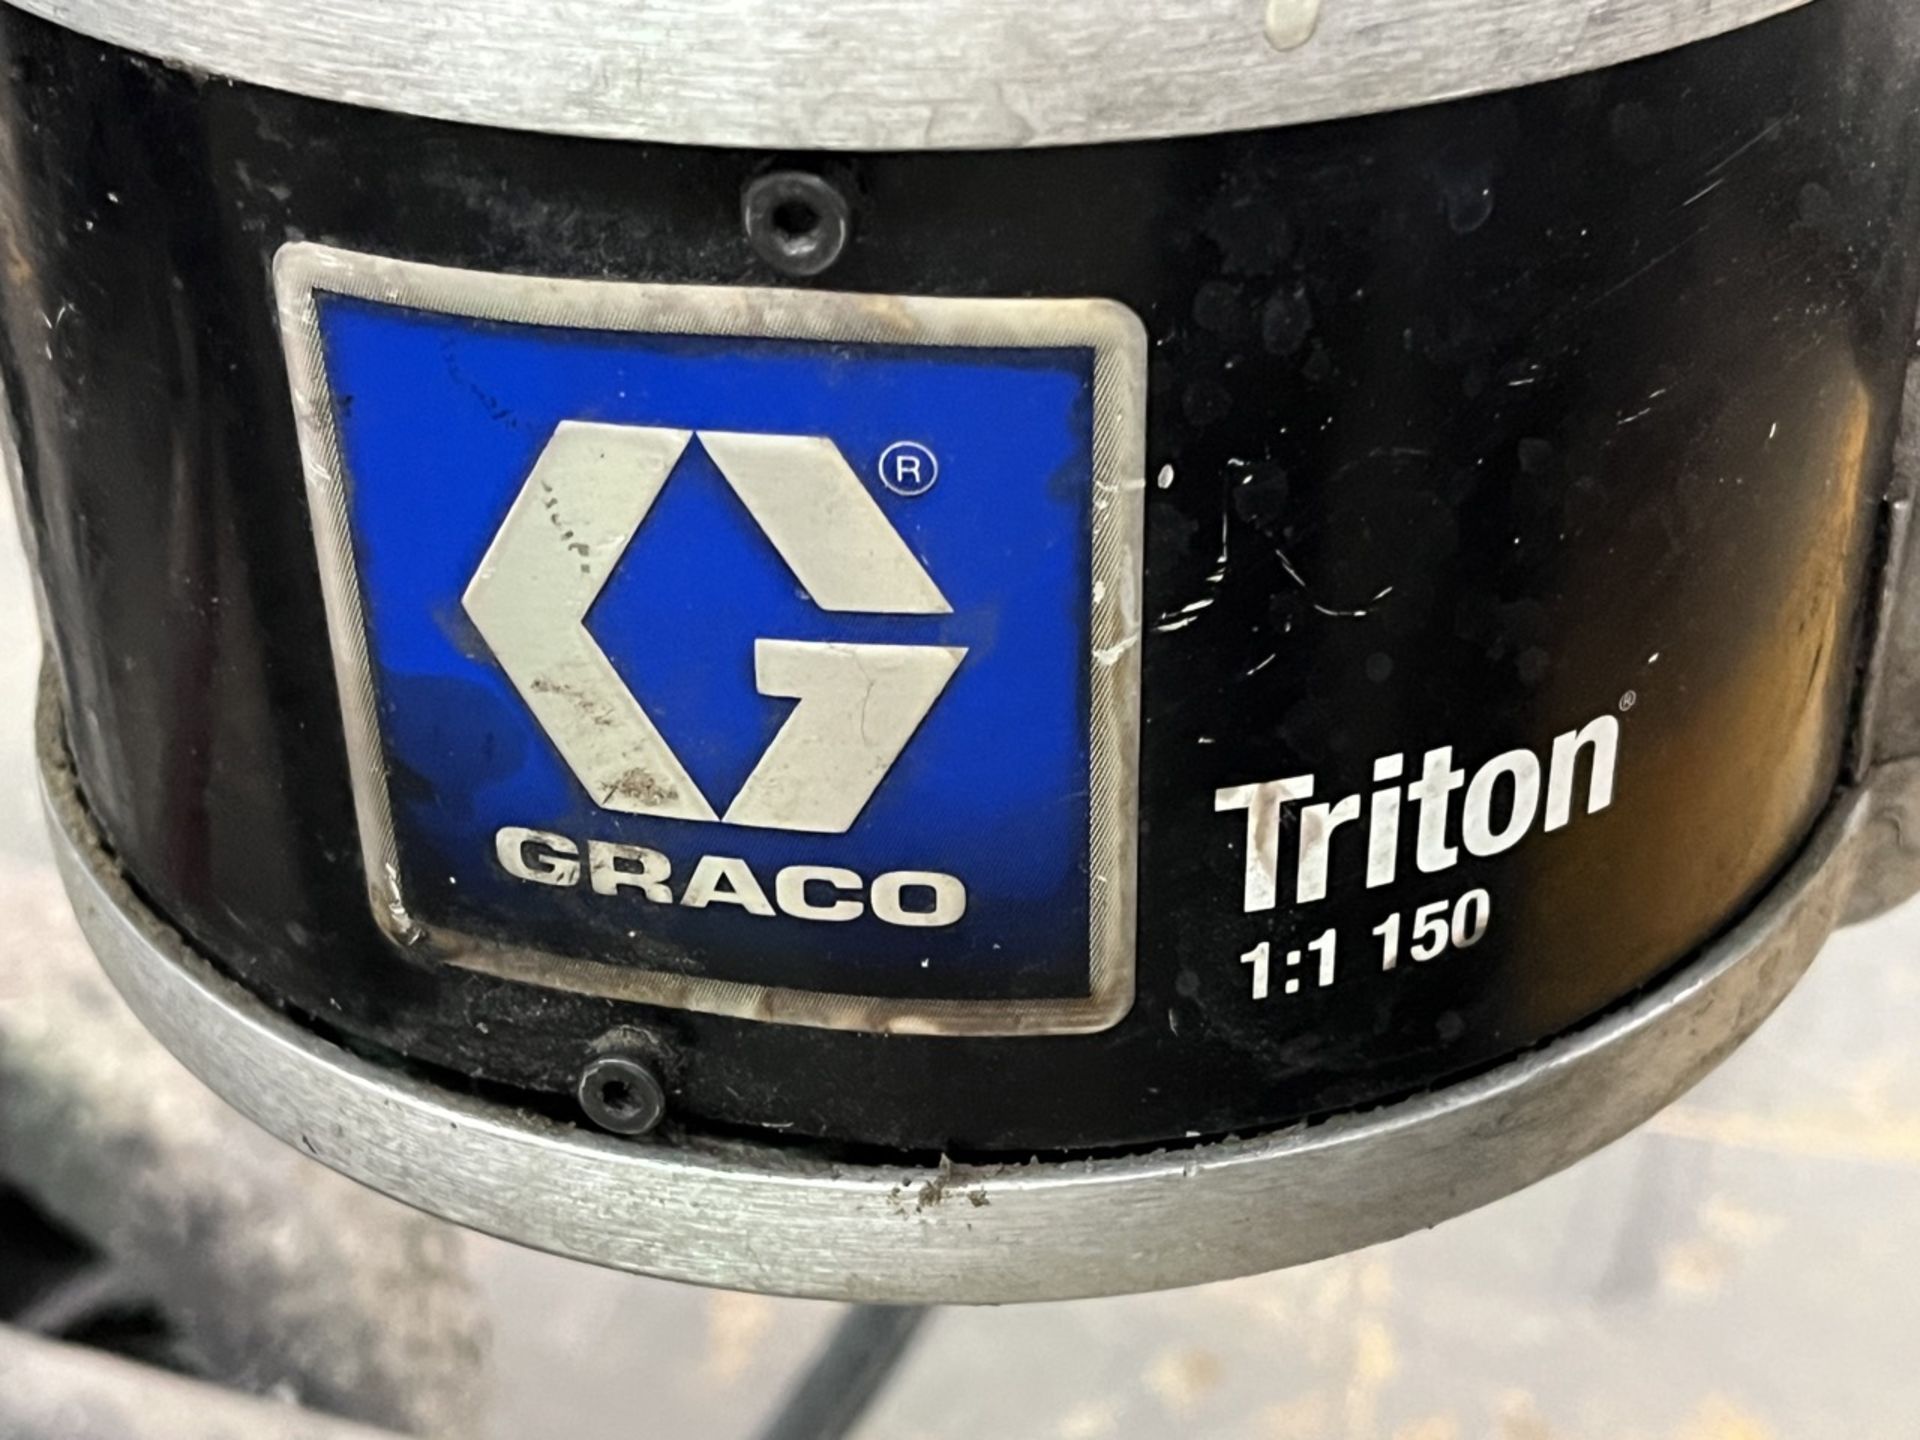 Triton Portable Pneumatic Paint Station, Serial No. E07A, Equipped with Graco low pressure pump cap - Image 7 of 9